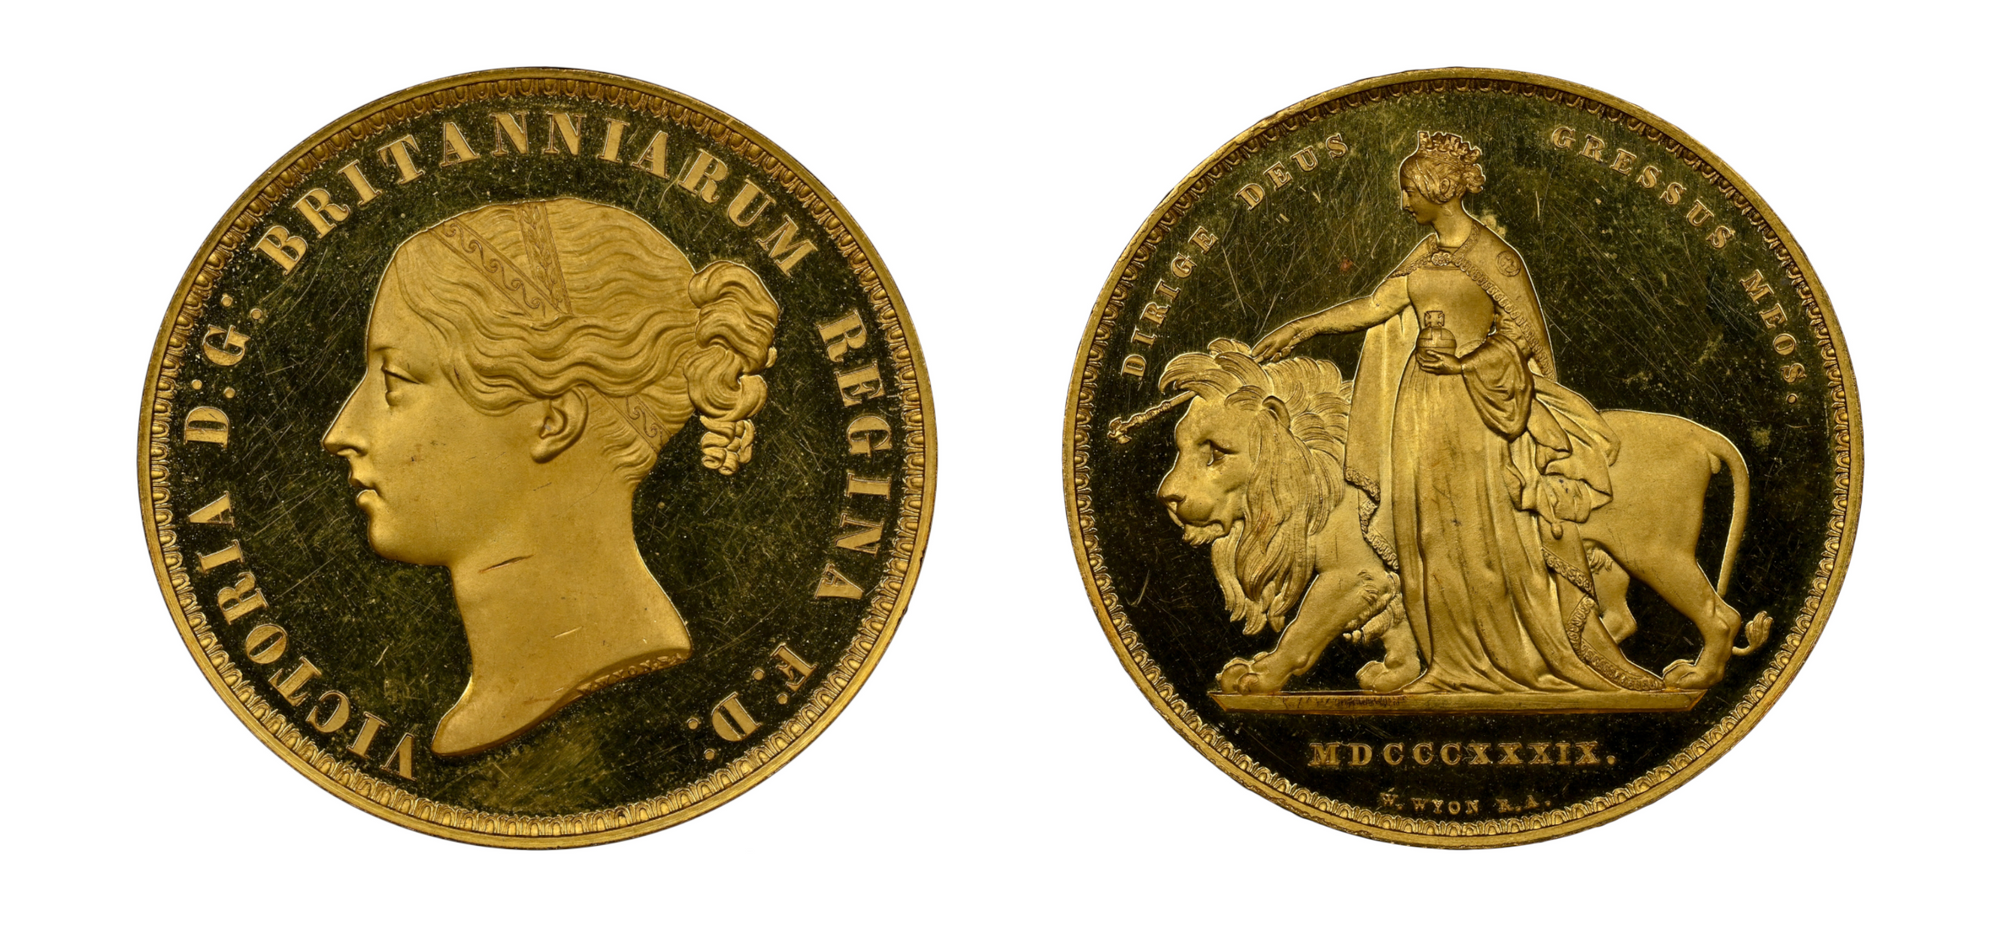 1839 Victoria gold Proof "Una and the Lion" 5 Pounds NGC PR64 Ultra Cameo - Hard Asset Management, Inc